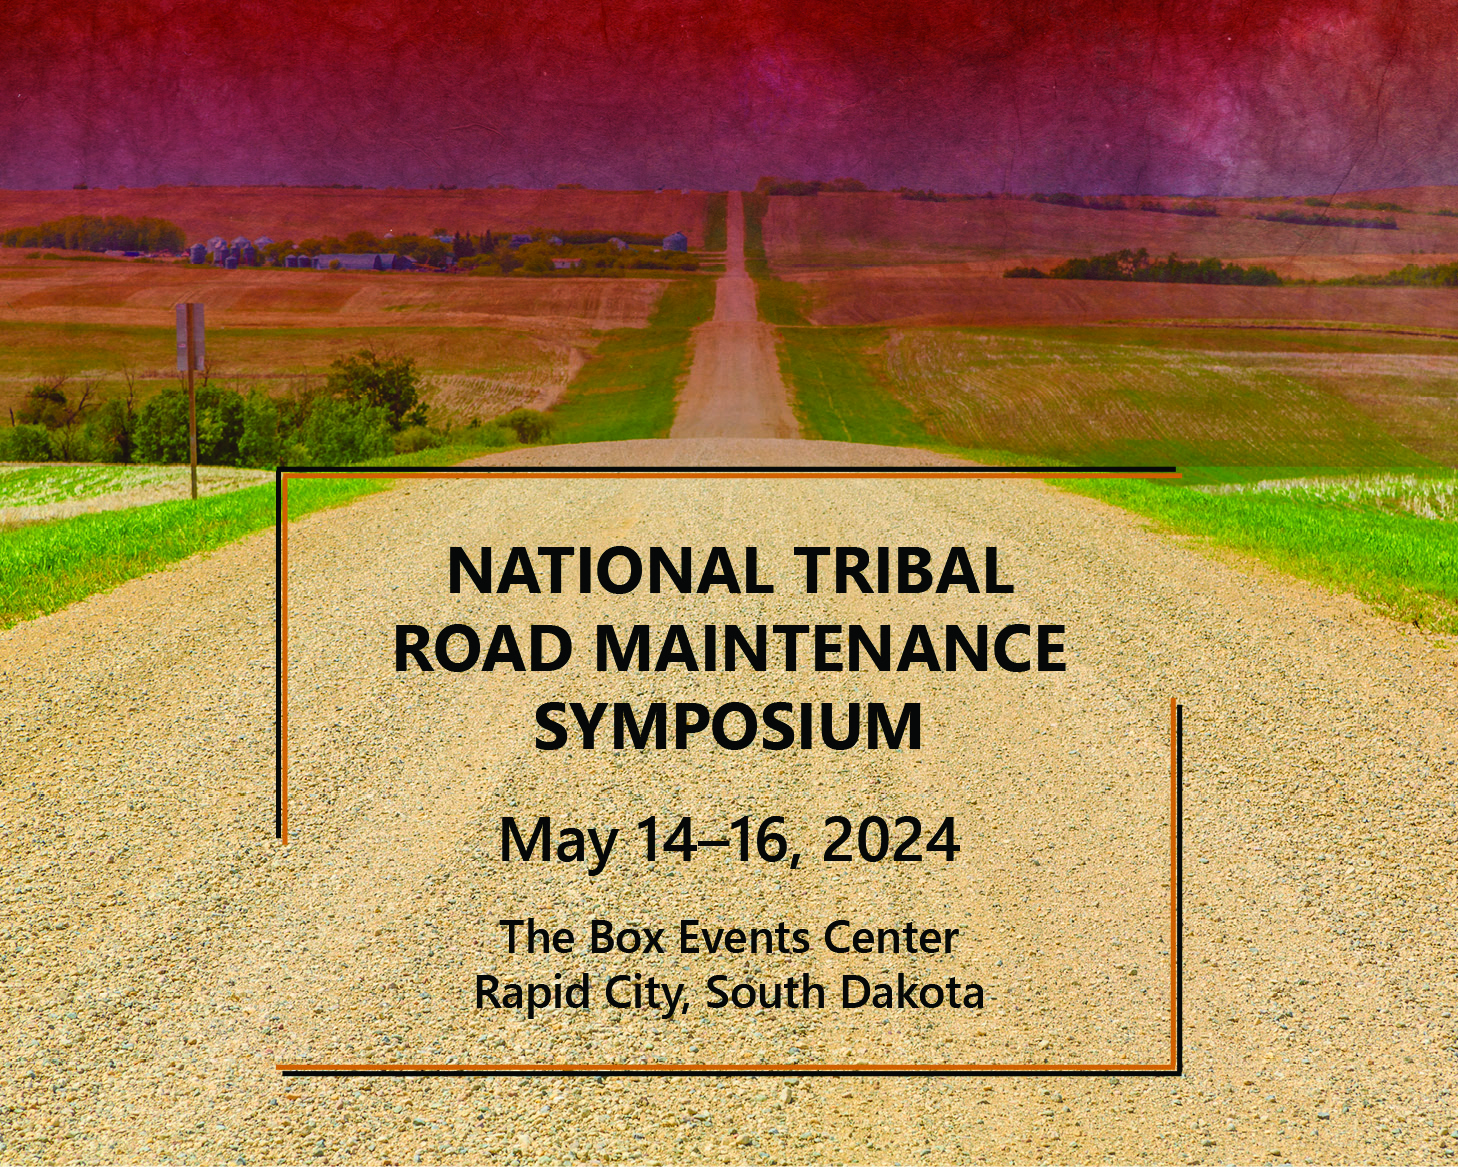 Plan to attend the 2024 National Tribal Road Maintenance Symposium in Rapid City.